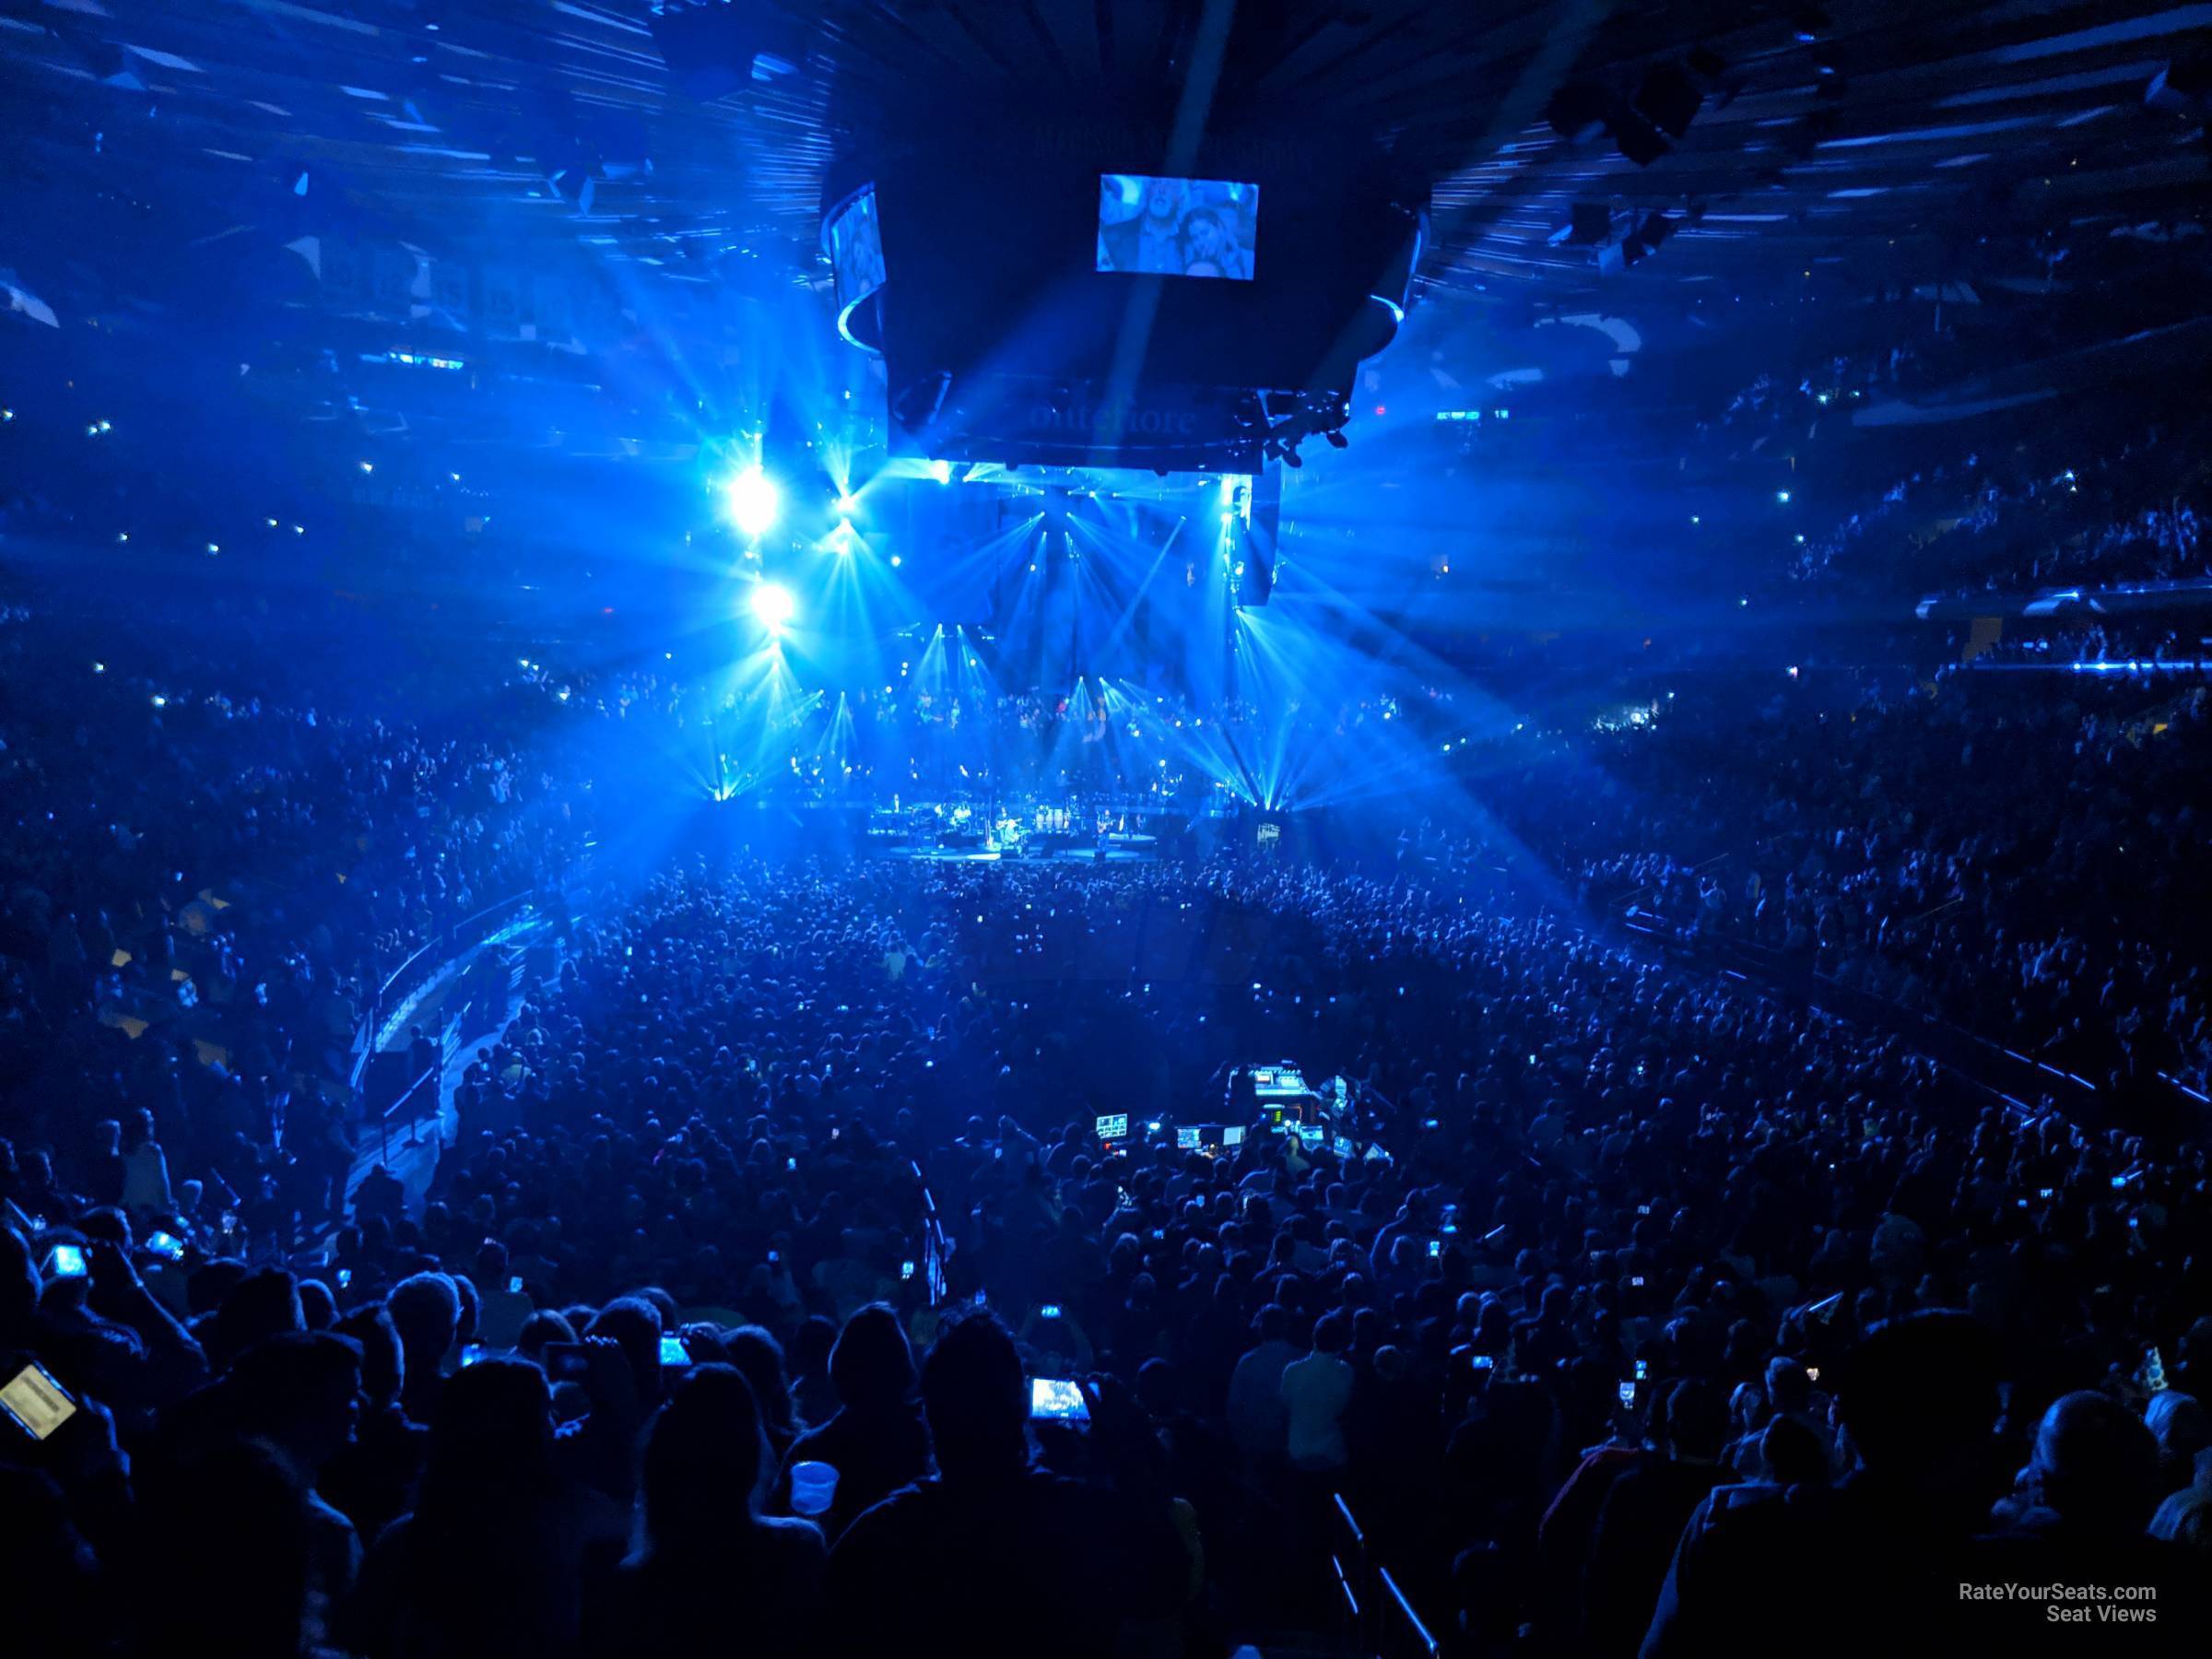 head-on concert view at Madison Square Garden